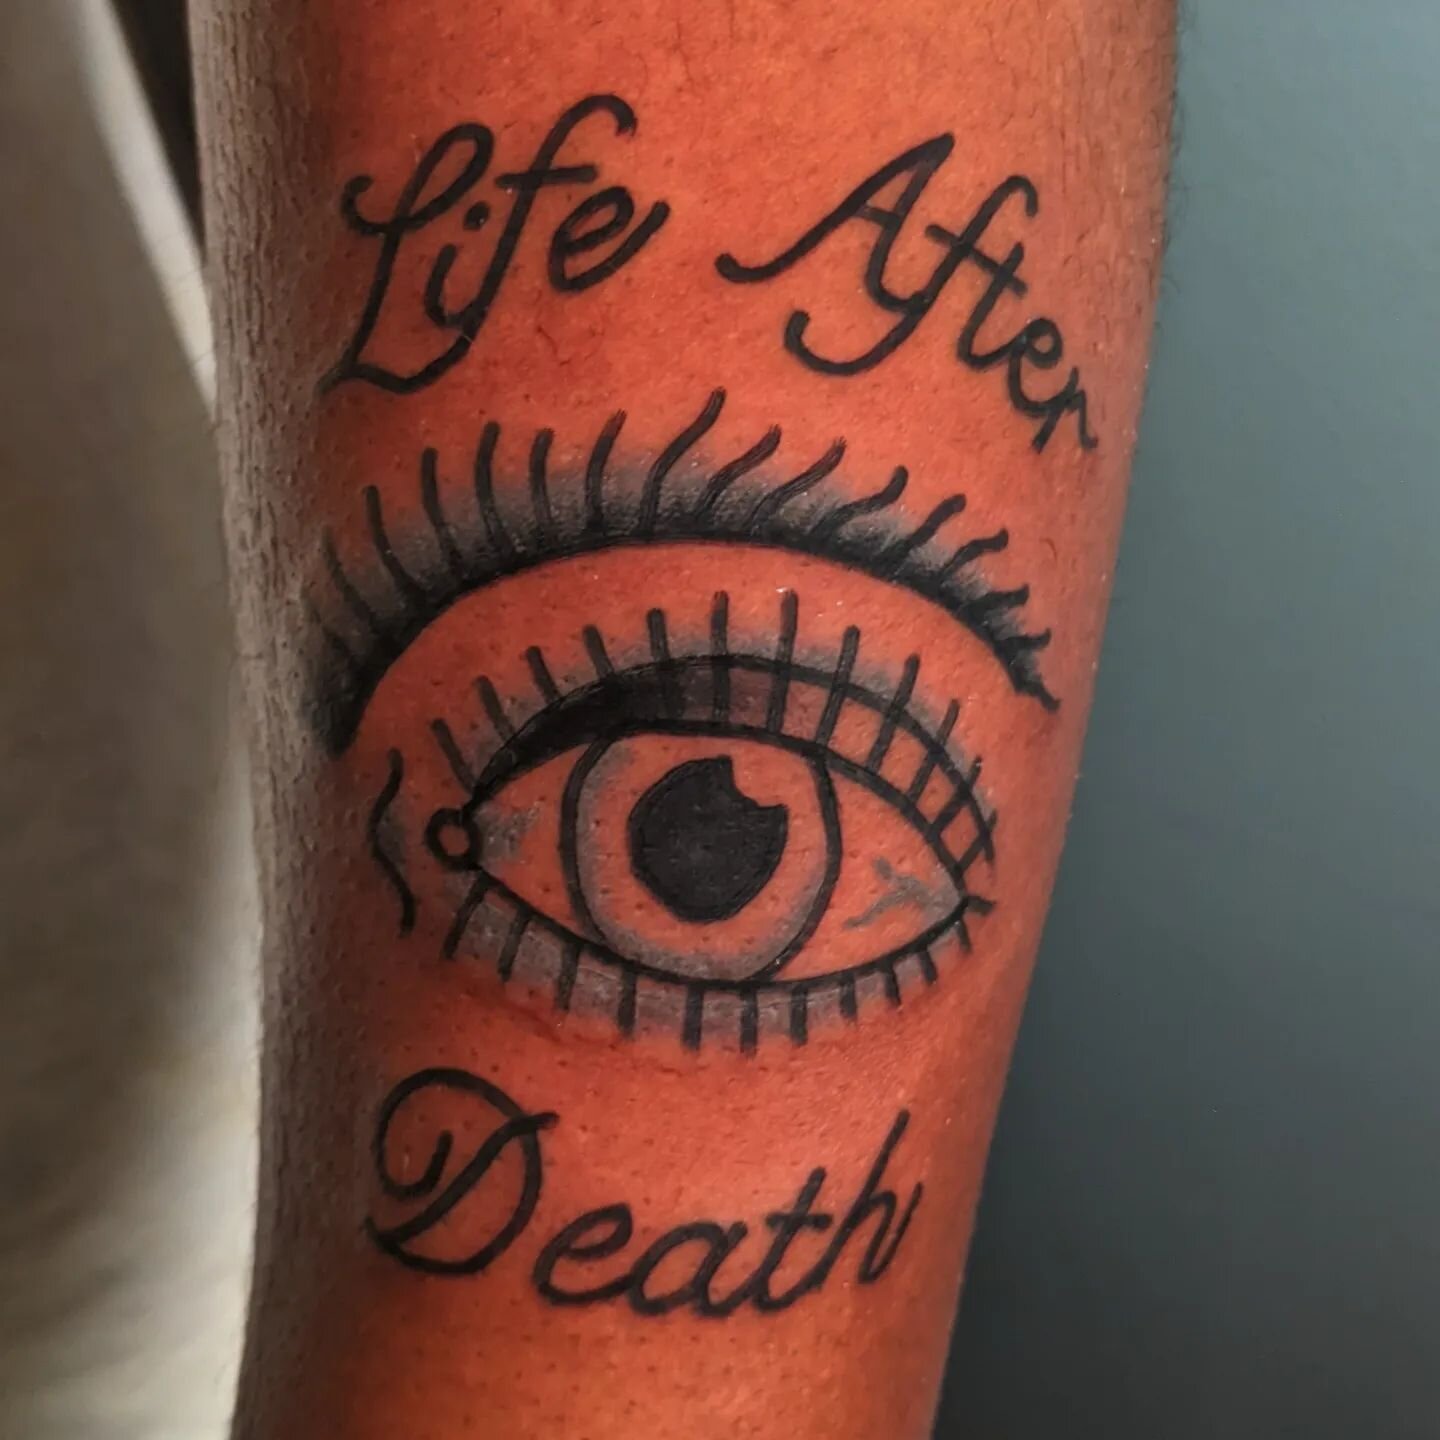 Added some words to this eye from my flash for Josh.  Thanks for getting tattooed!